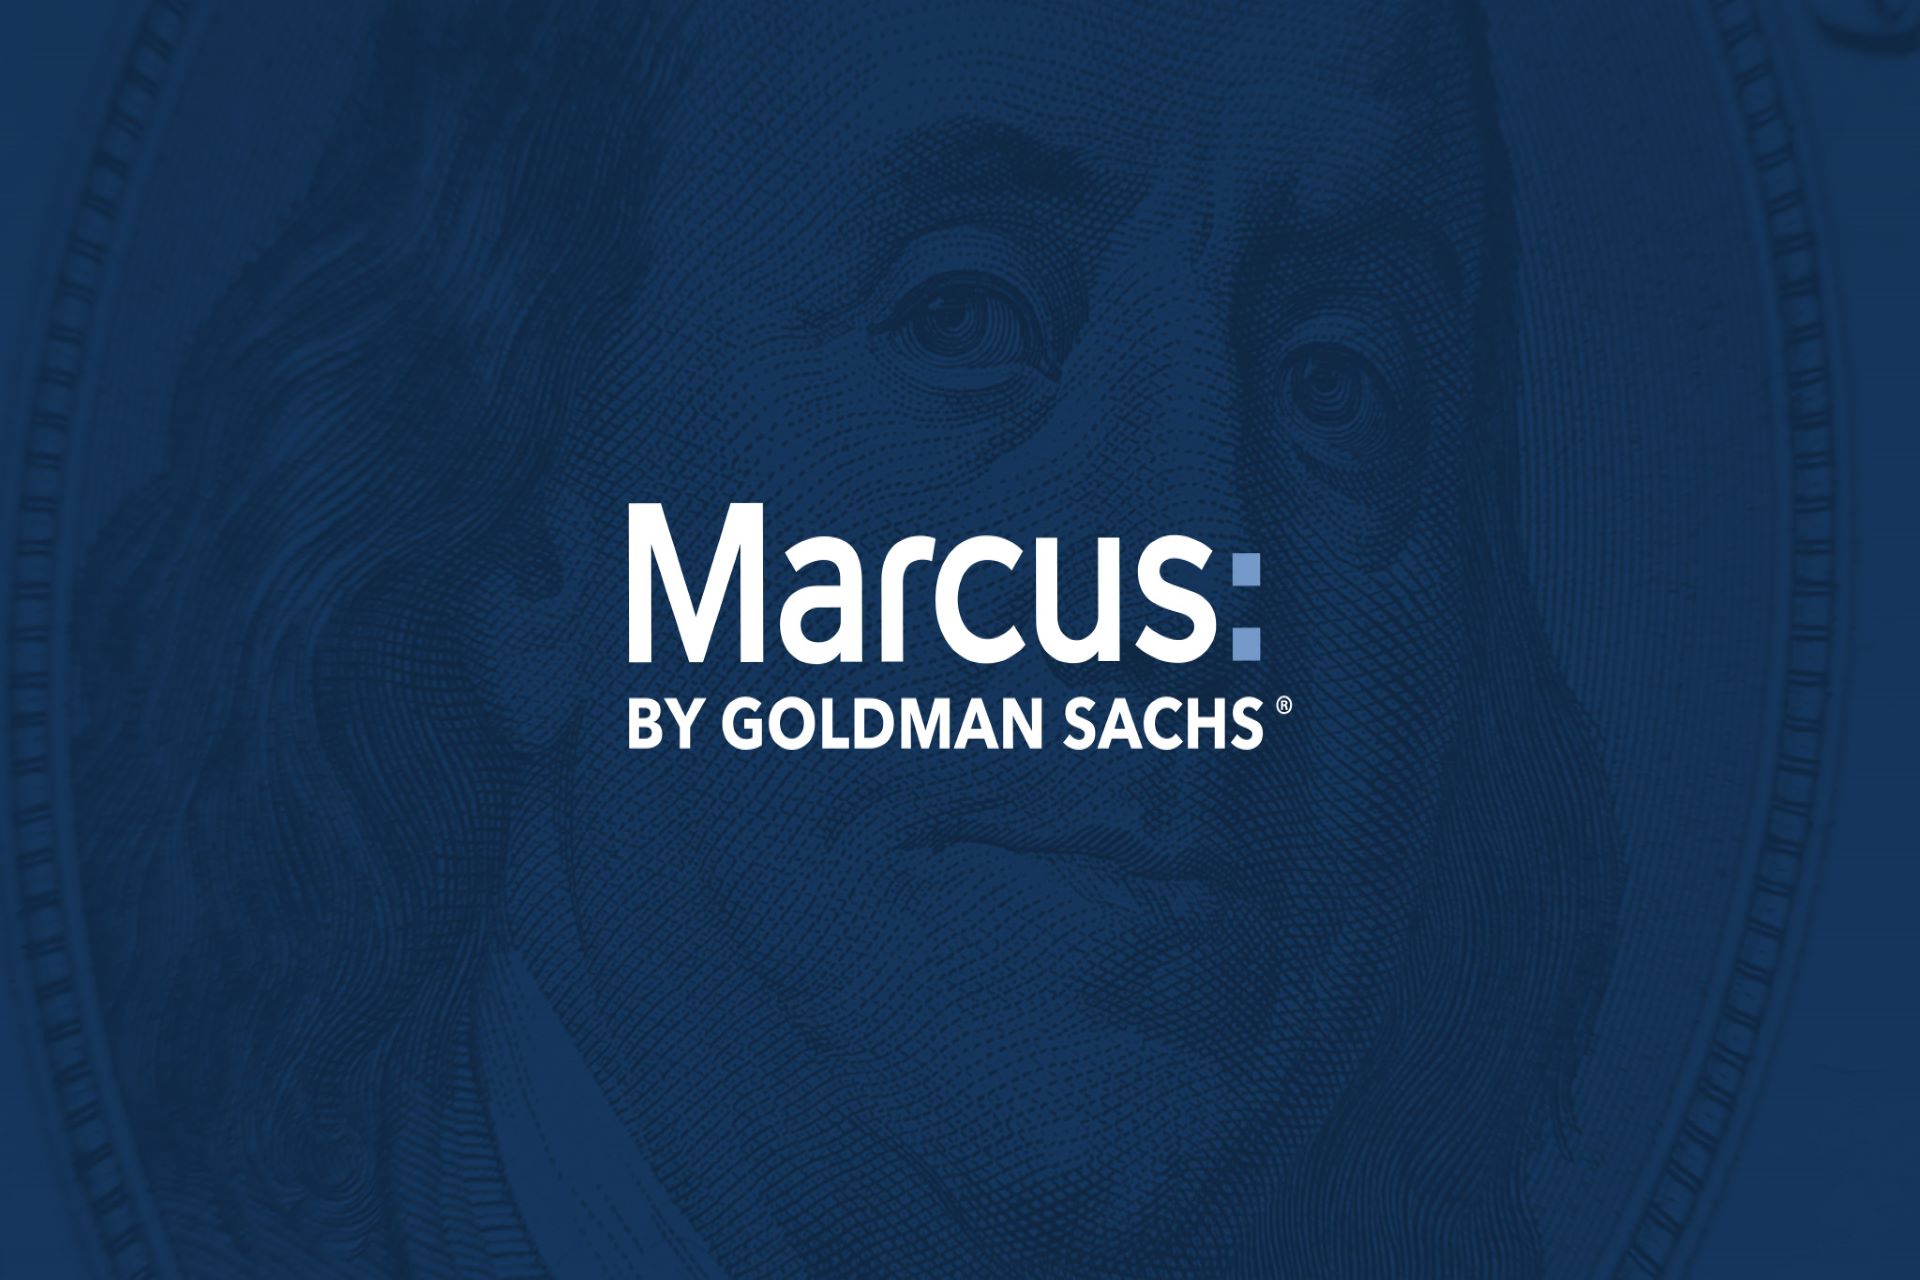 Goldman Sachs To Launch Marcus Credit Card